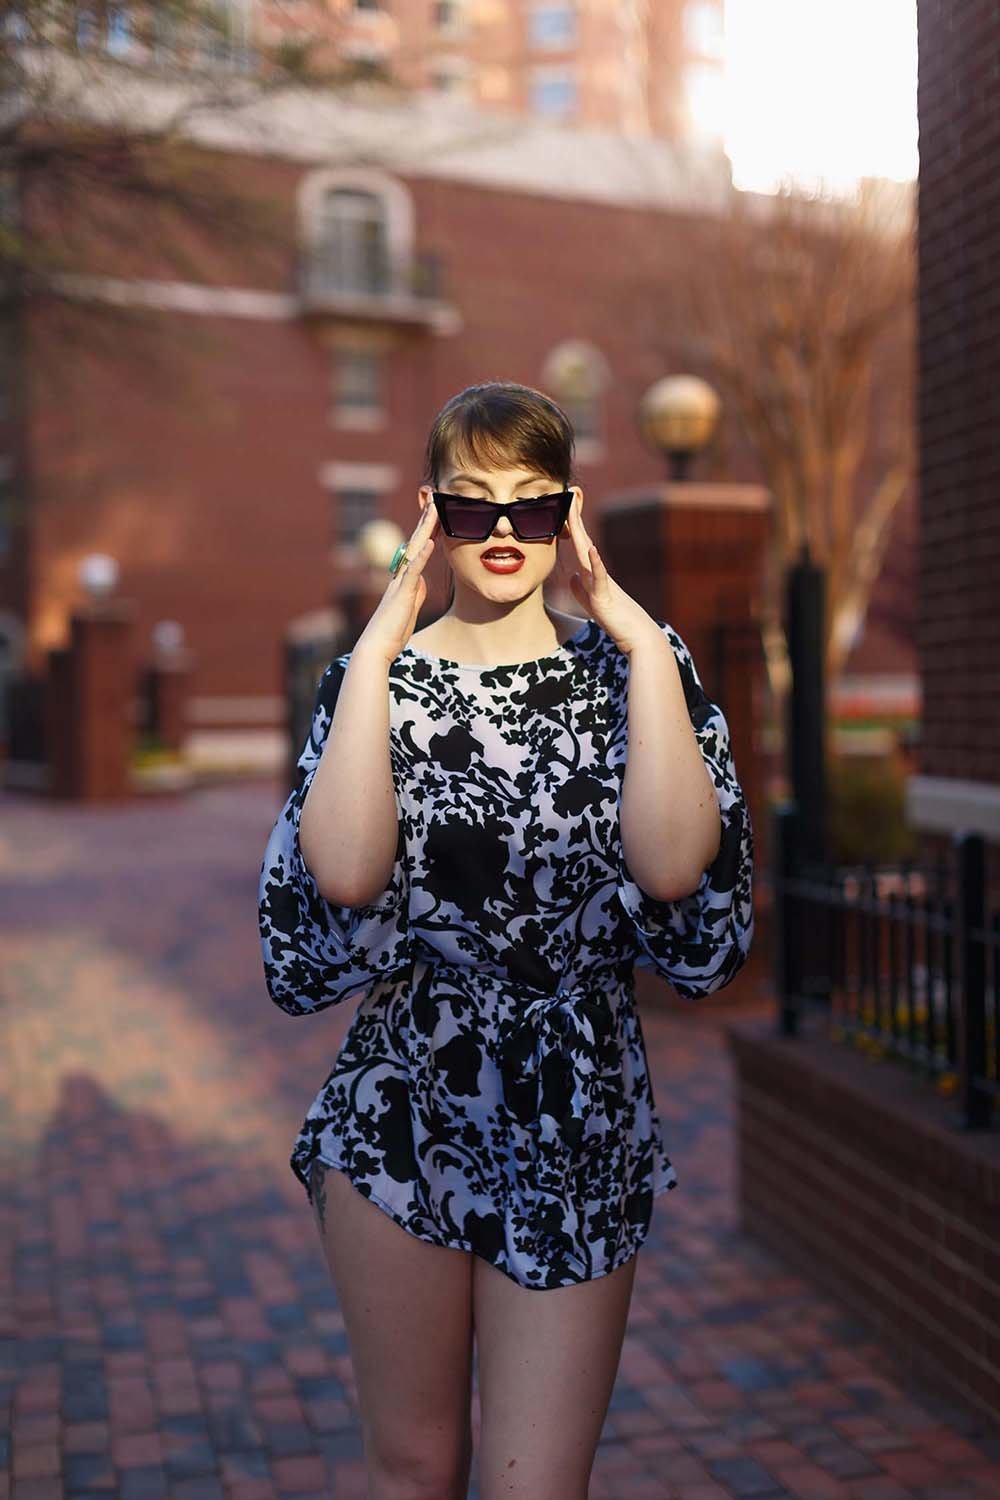 high-fashion-model-80ies-inspired-romper-statement-signature-pose-breaking-tradition-alexandria-virginia